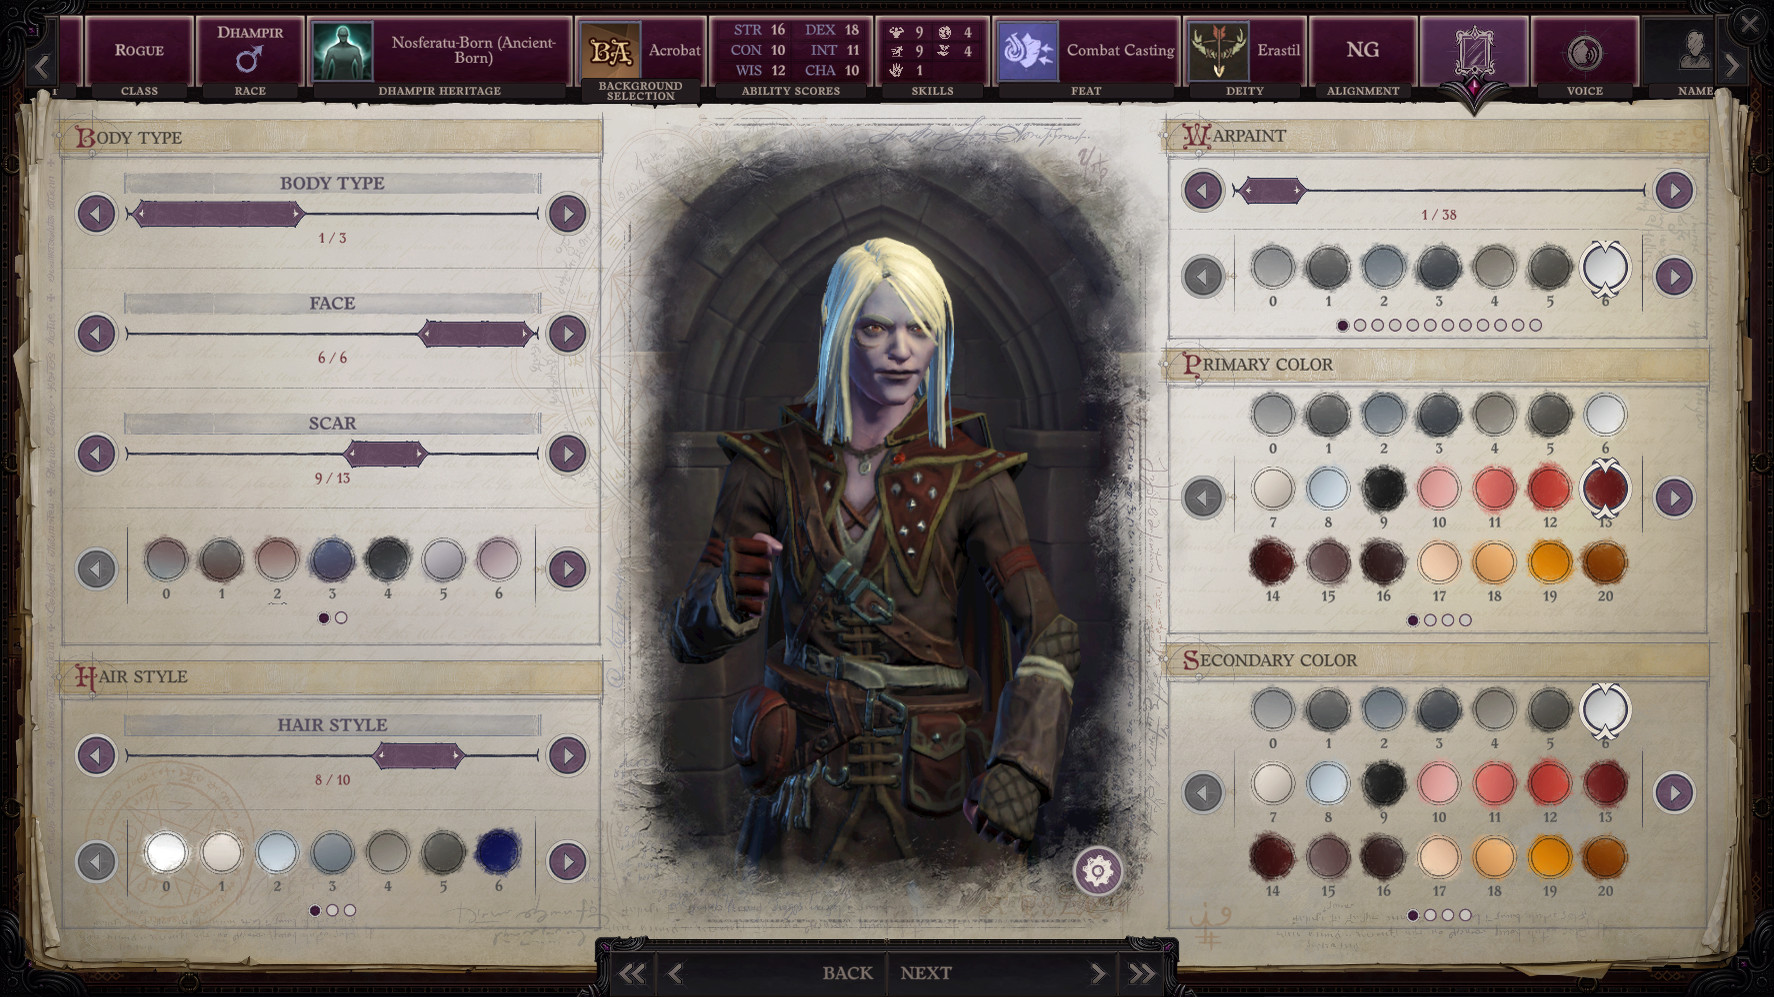 Pathfinder: Wrath of the Righteous - Faces of War Featured Screenshot #1